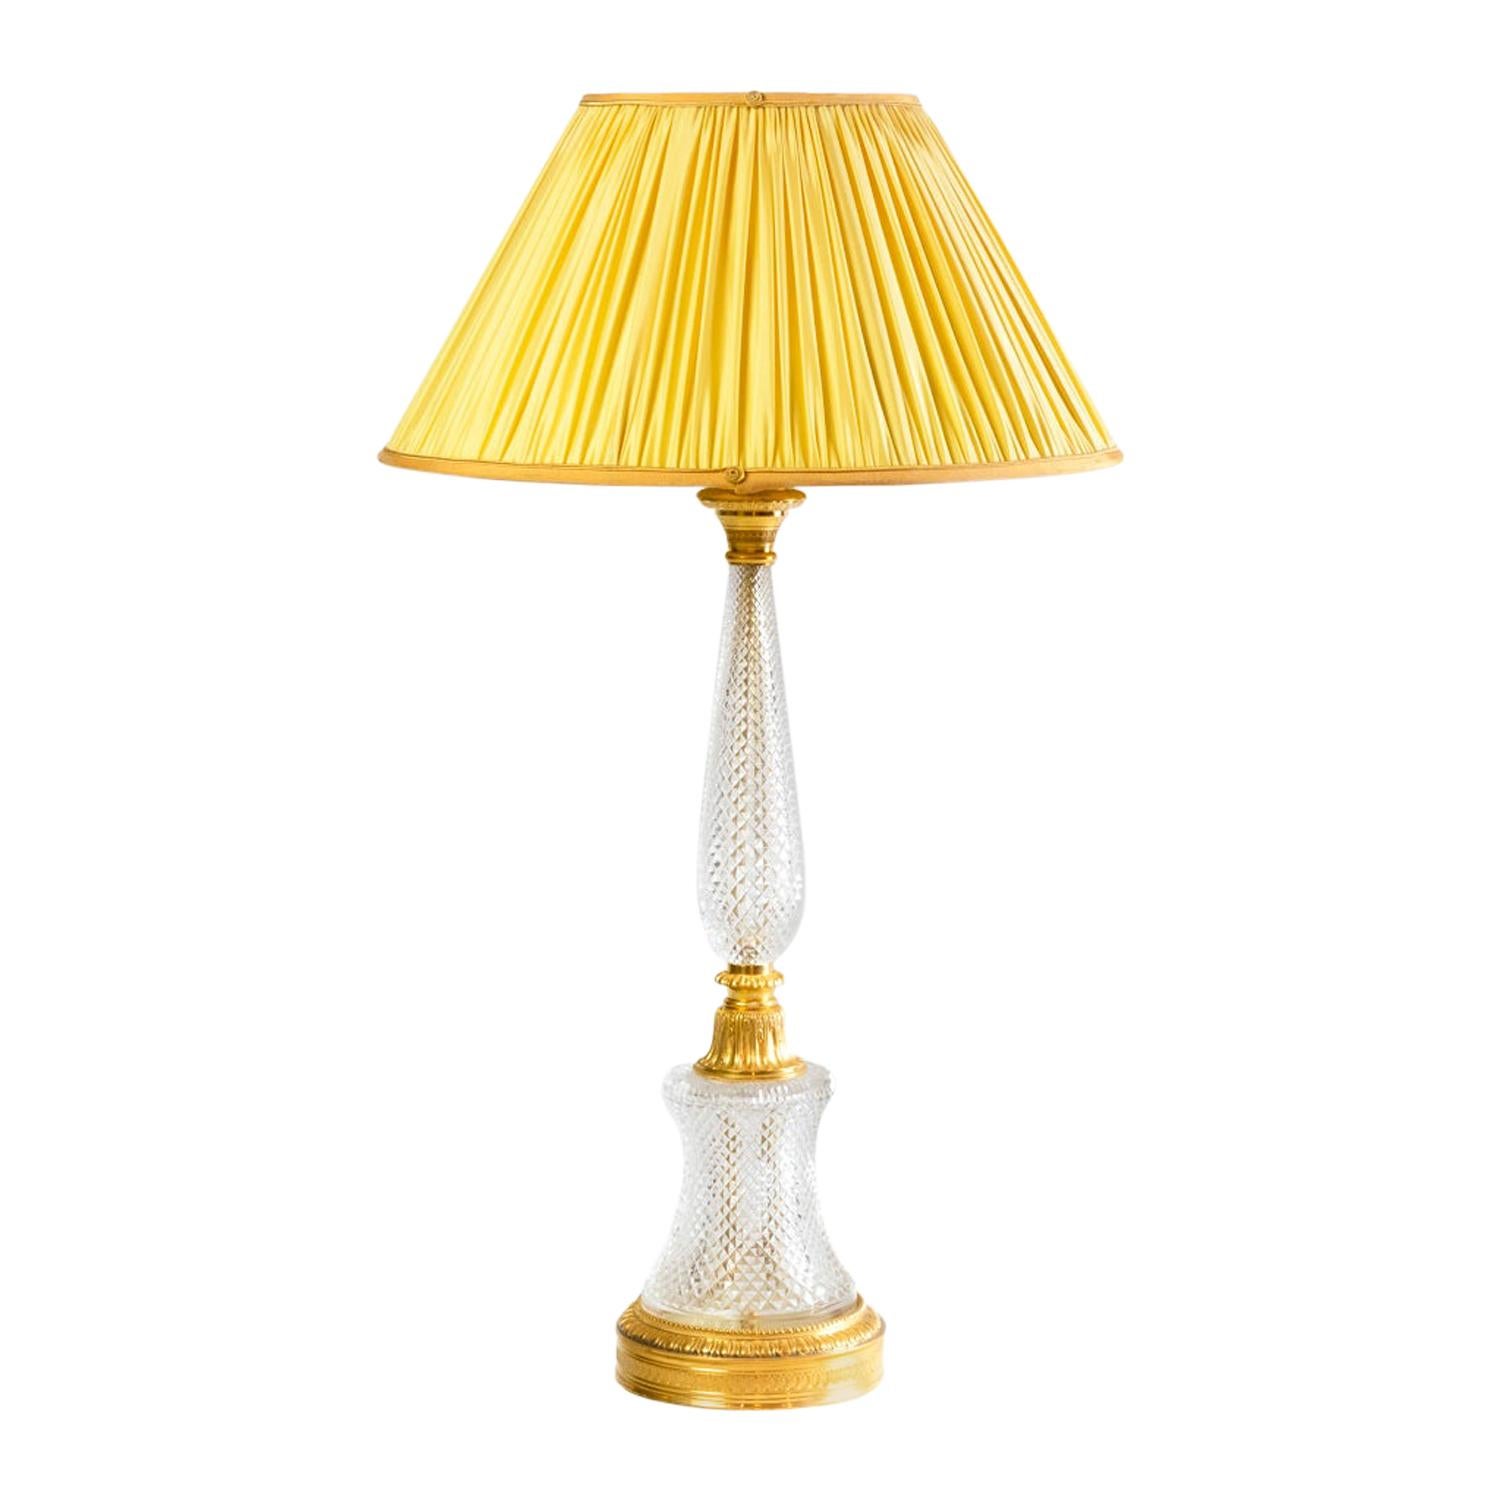 Large Empire Style Lamp in Cut Crystal and Gilt Bronze, 1940s For Sale